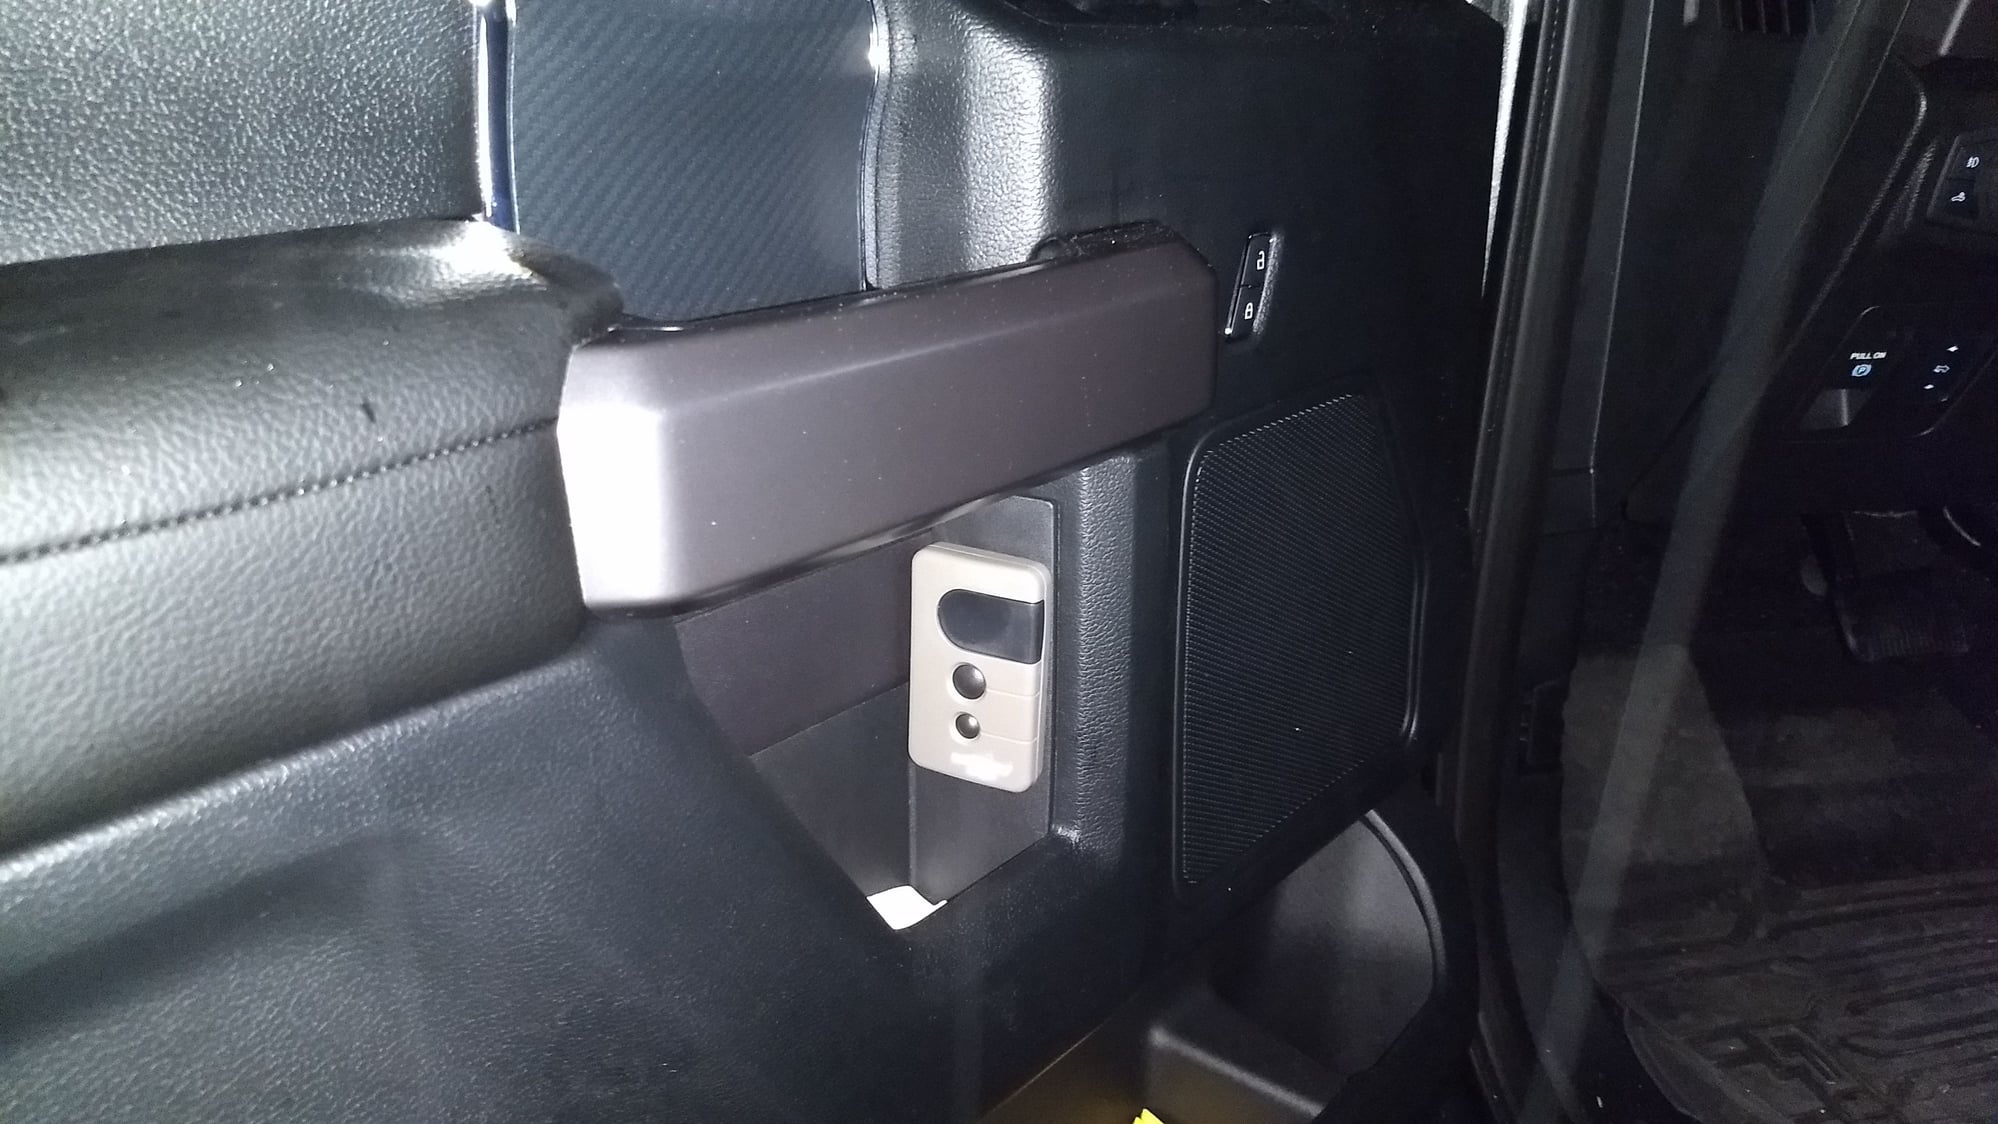 Xlt Garage Door Opener Placement Ford F150 Forum Community Of Ford Truck Fans